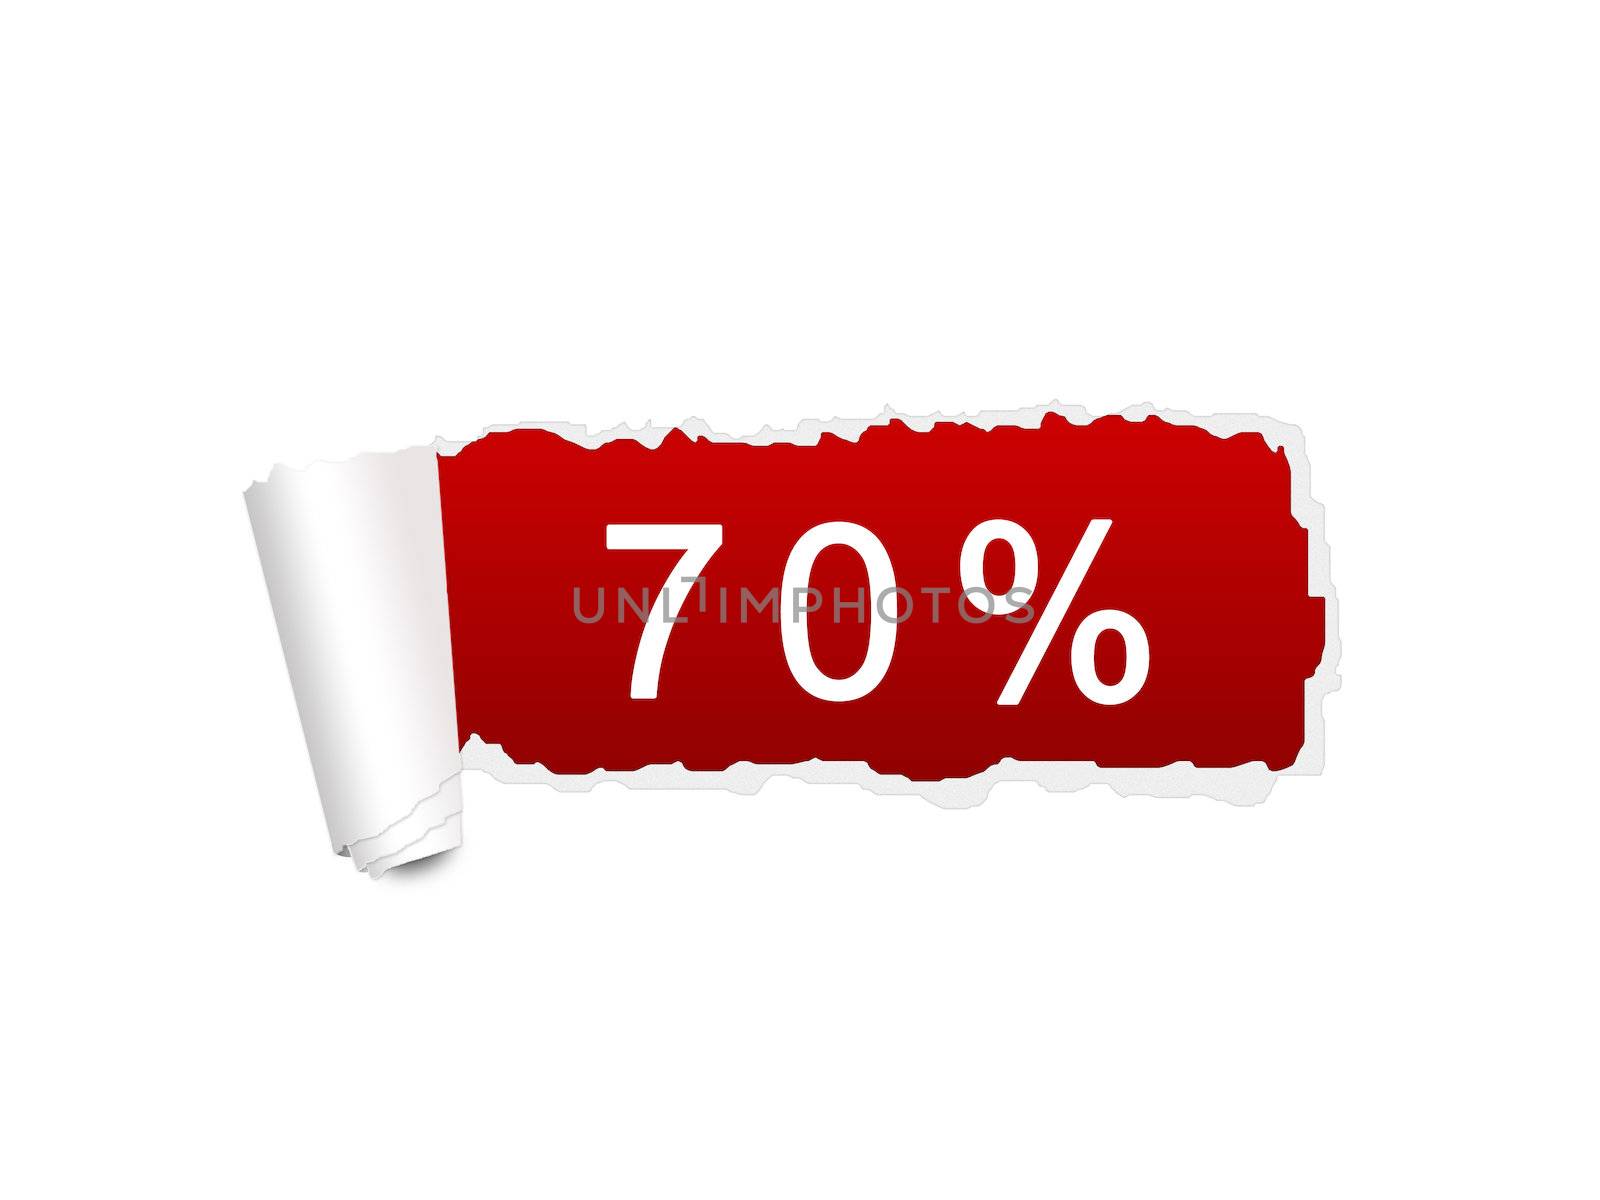 70 % discount sale on the ripped paper background